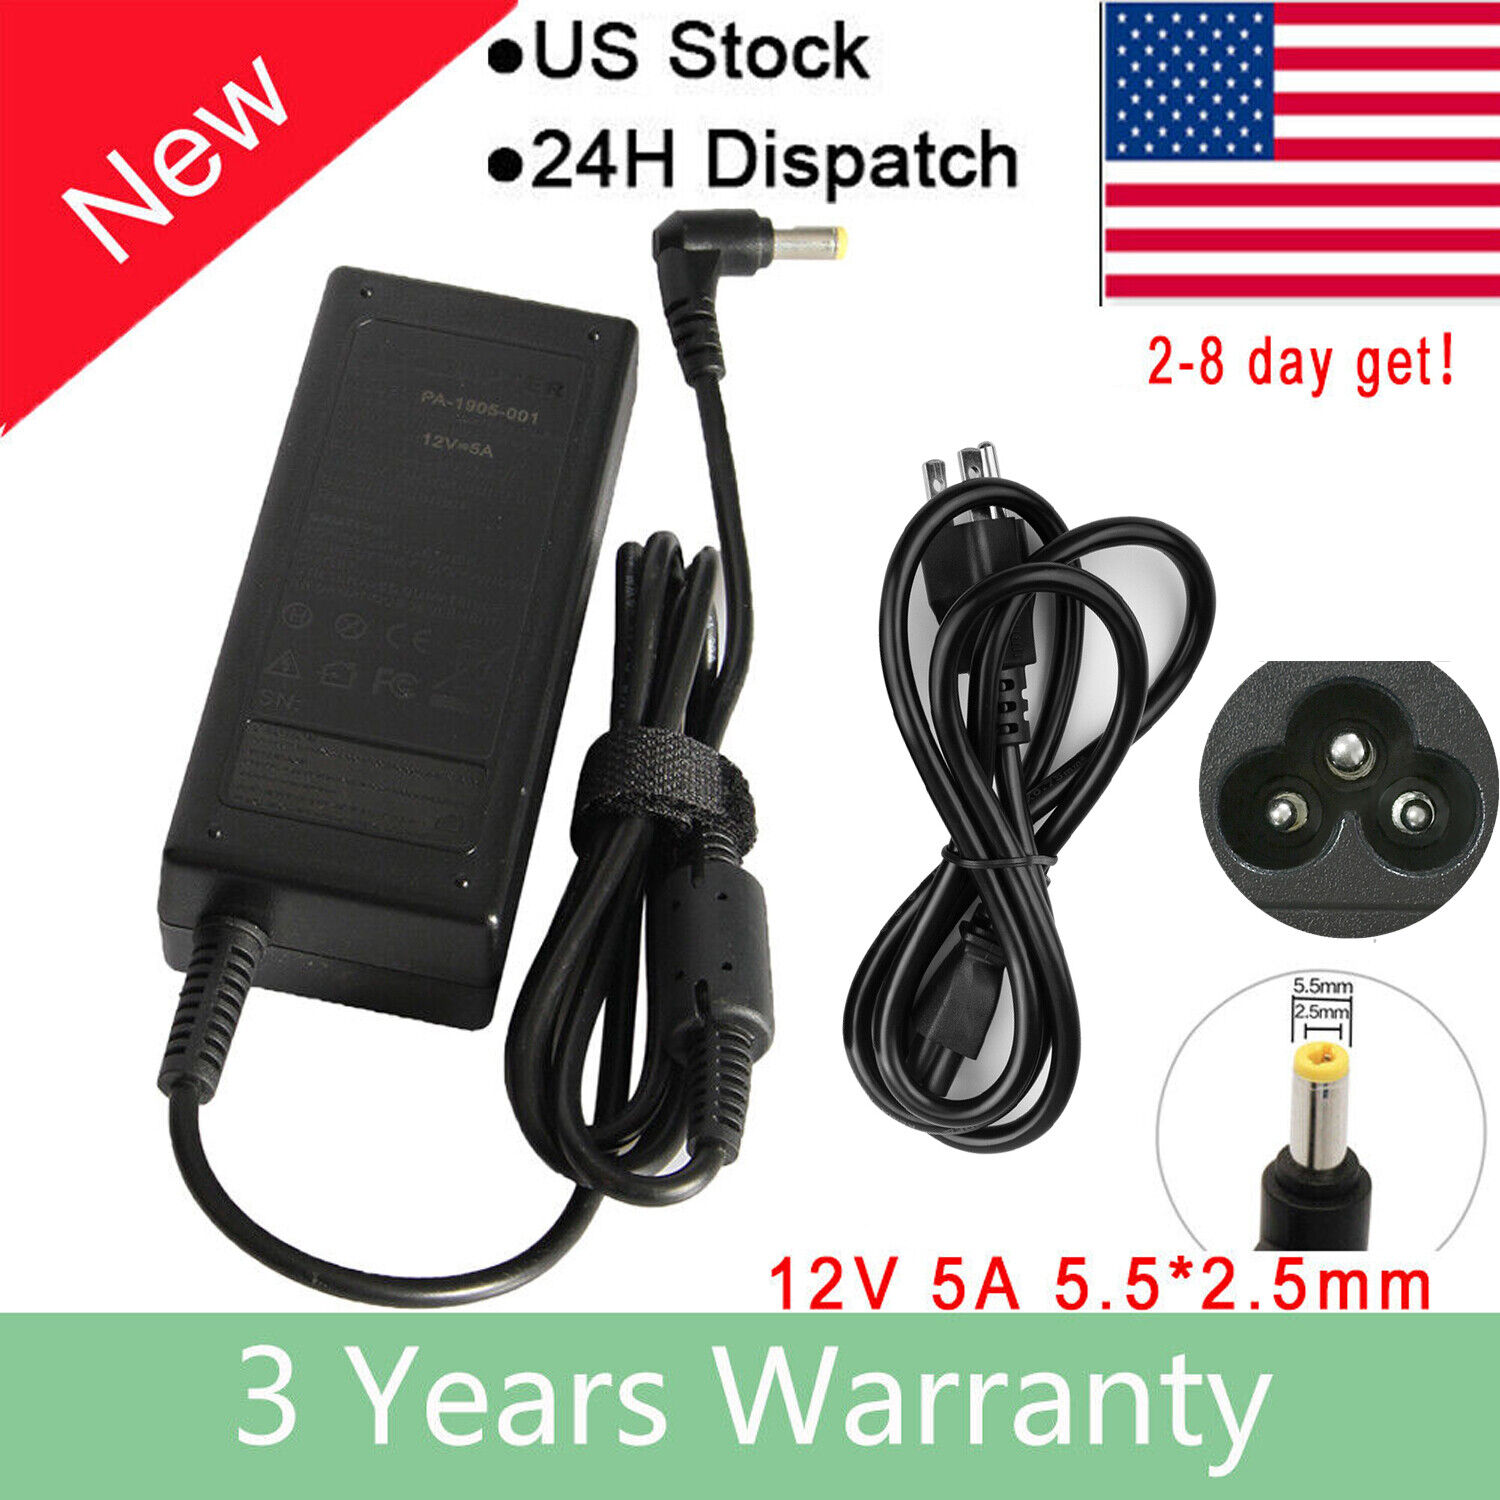 12V 5A AC DC Power Supply 5 Amp 12 Volt Adapter Charger LCD Screen 5.5*2.5mm F